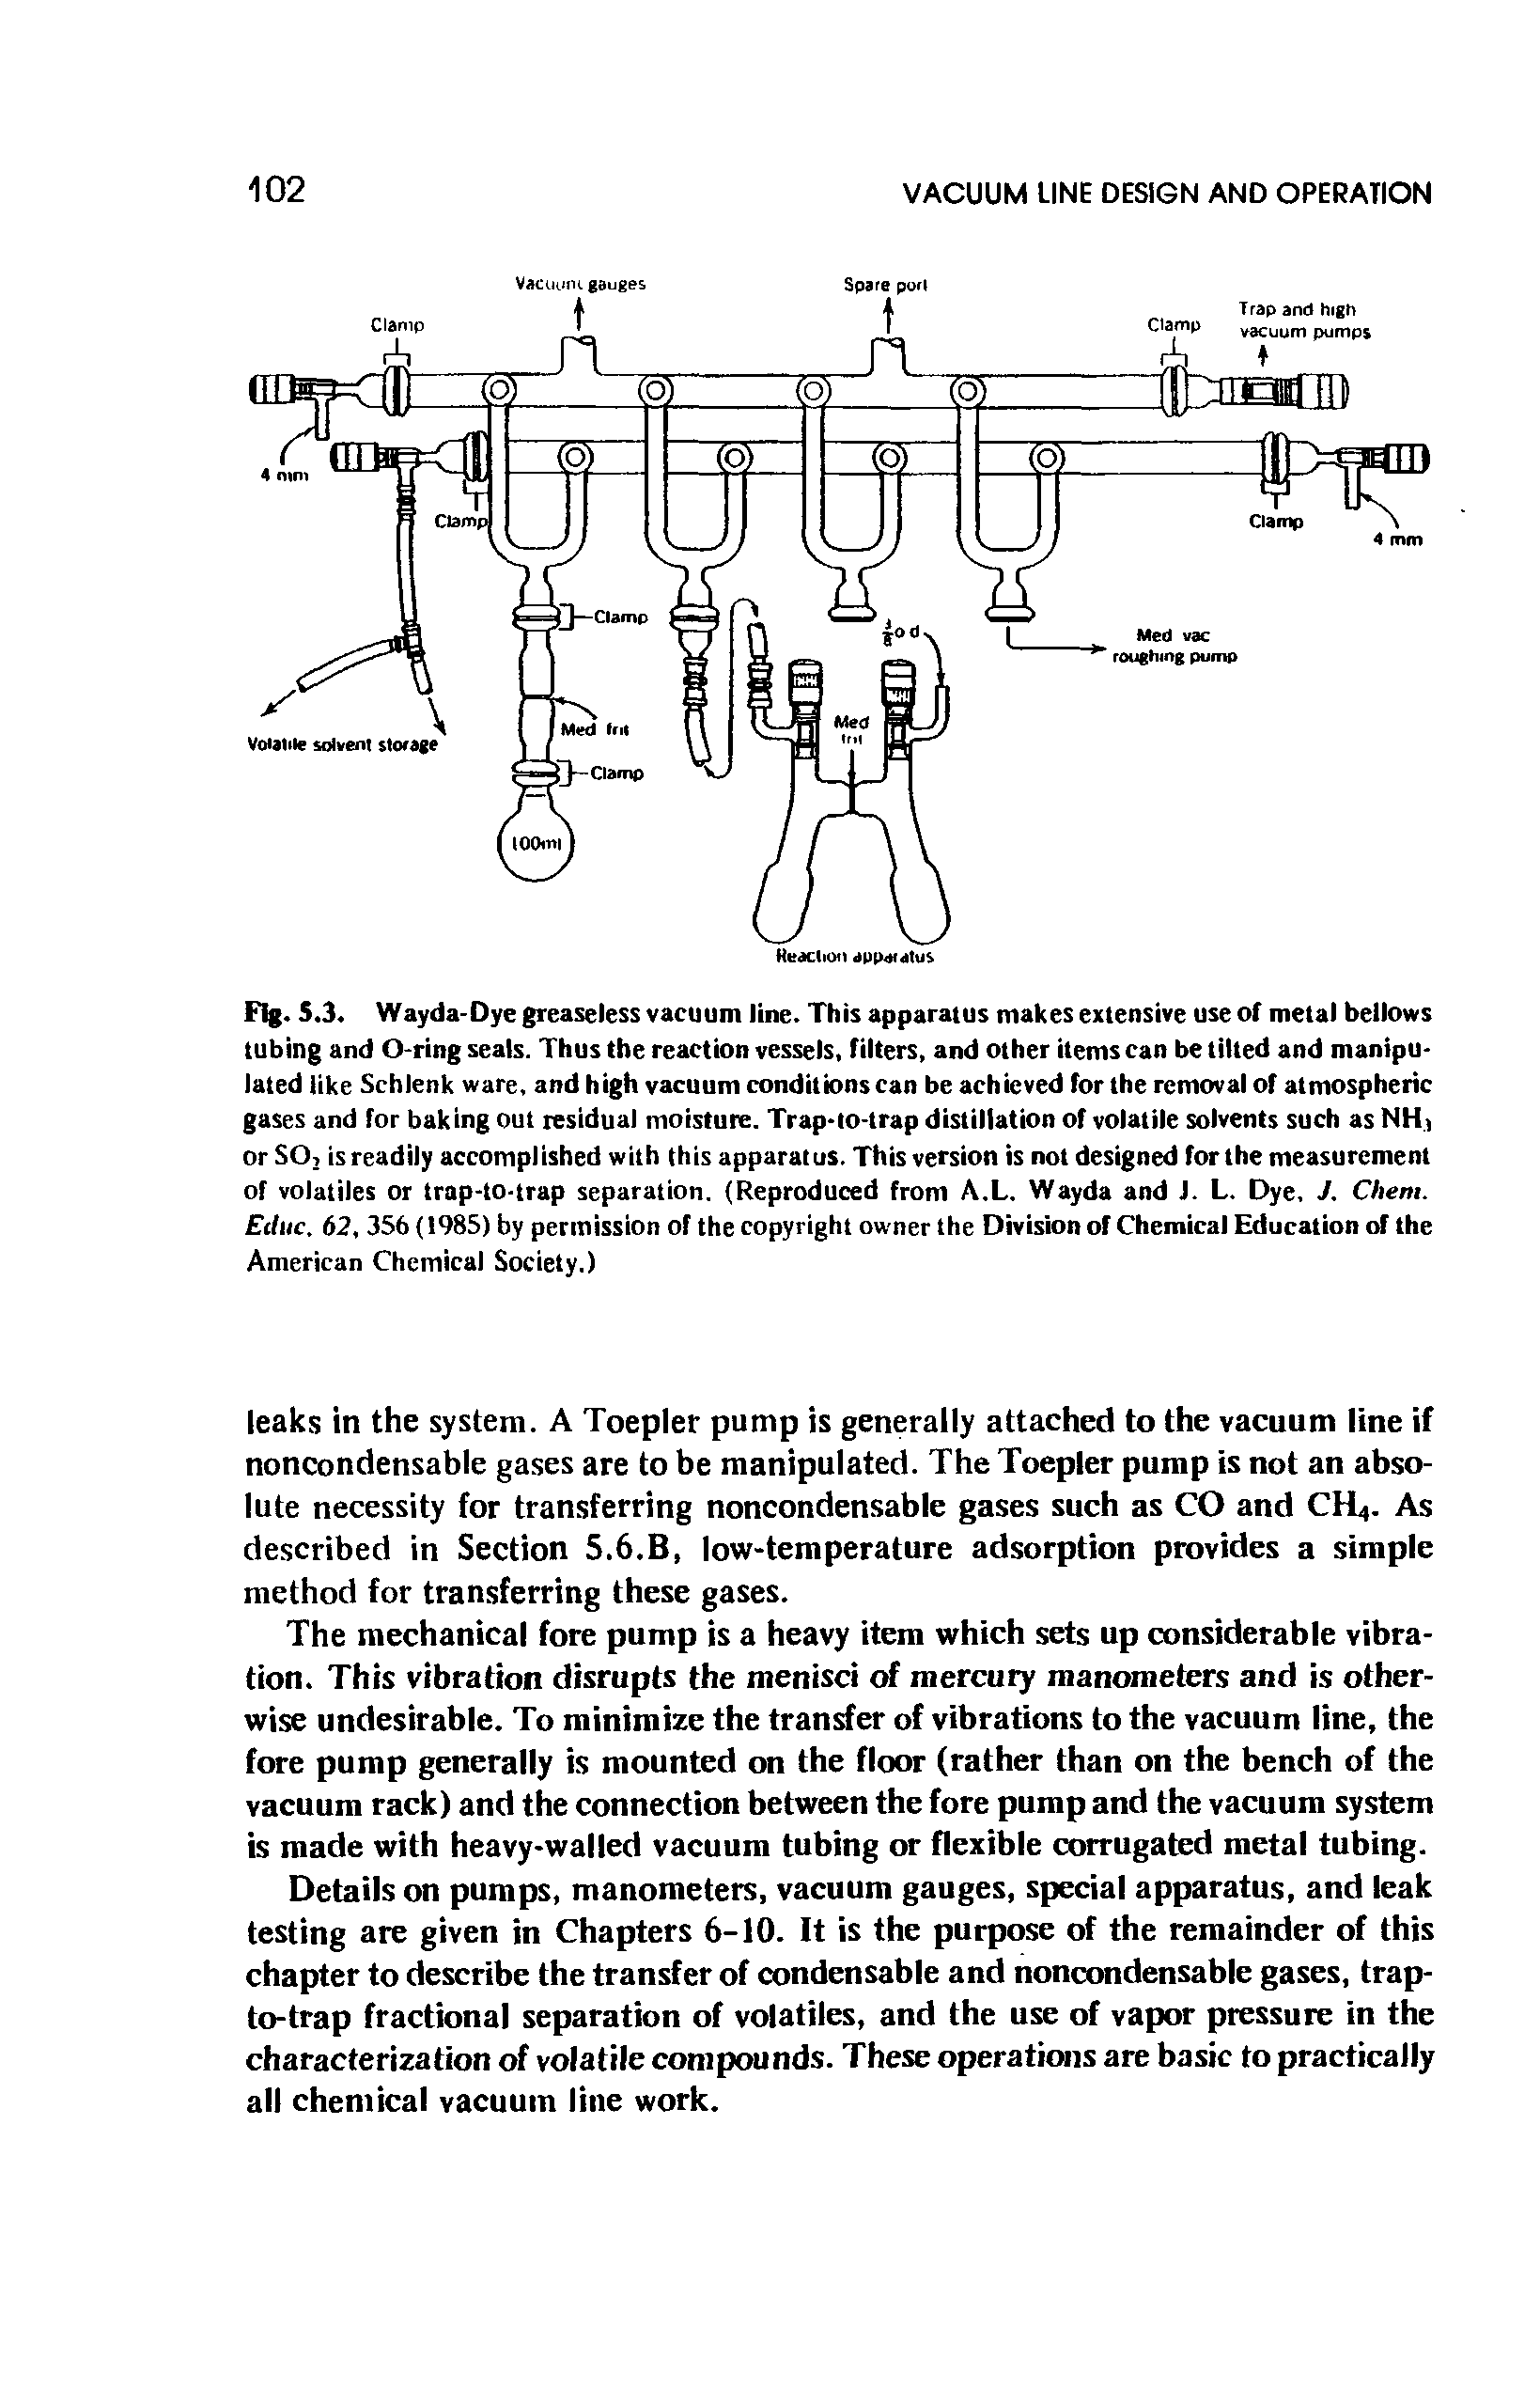 Fig. 5.3. Wayda-Dye greaseless vacuum line. This apparatus makes extensive use of metal bellows tubing and O-ring seals. Thus the reaction vessels, filters, and other items can be tilted and manipu lated like Schlenk ware, and high vacuum conditions can be achieved for the removal of atmospheric gases and for baking out residual moisture. Trap to-trap distillation of volatile solvents such as NH) or SO is readily accomplished with this apparatus. This version is not designed for the measurement of volatiles or trap-to-trap separation. (Reproduced from A.L. Way da and J. L. Dye, J. Chent. Educ. 62, 356 (1985) by permission of the copyright owner the Division of Chemical Education of the American Chemical Society.)...